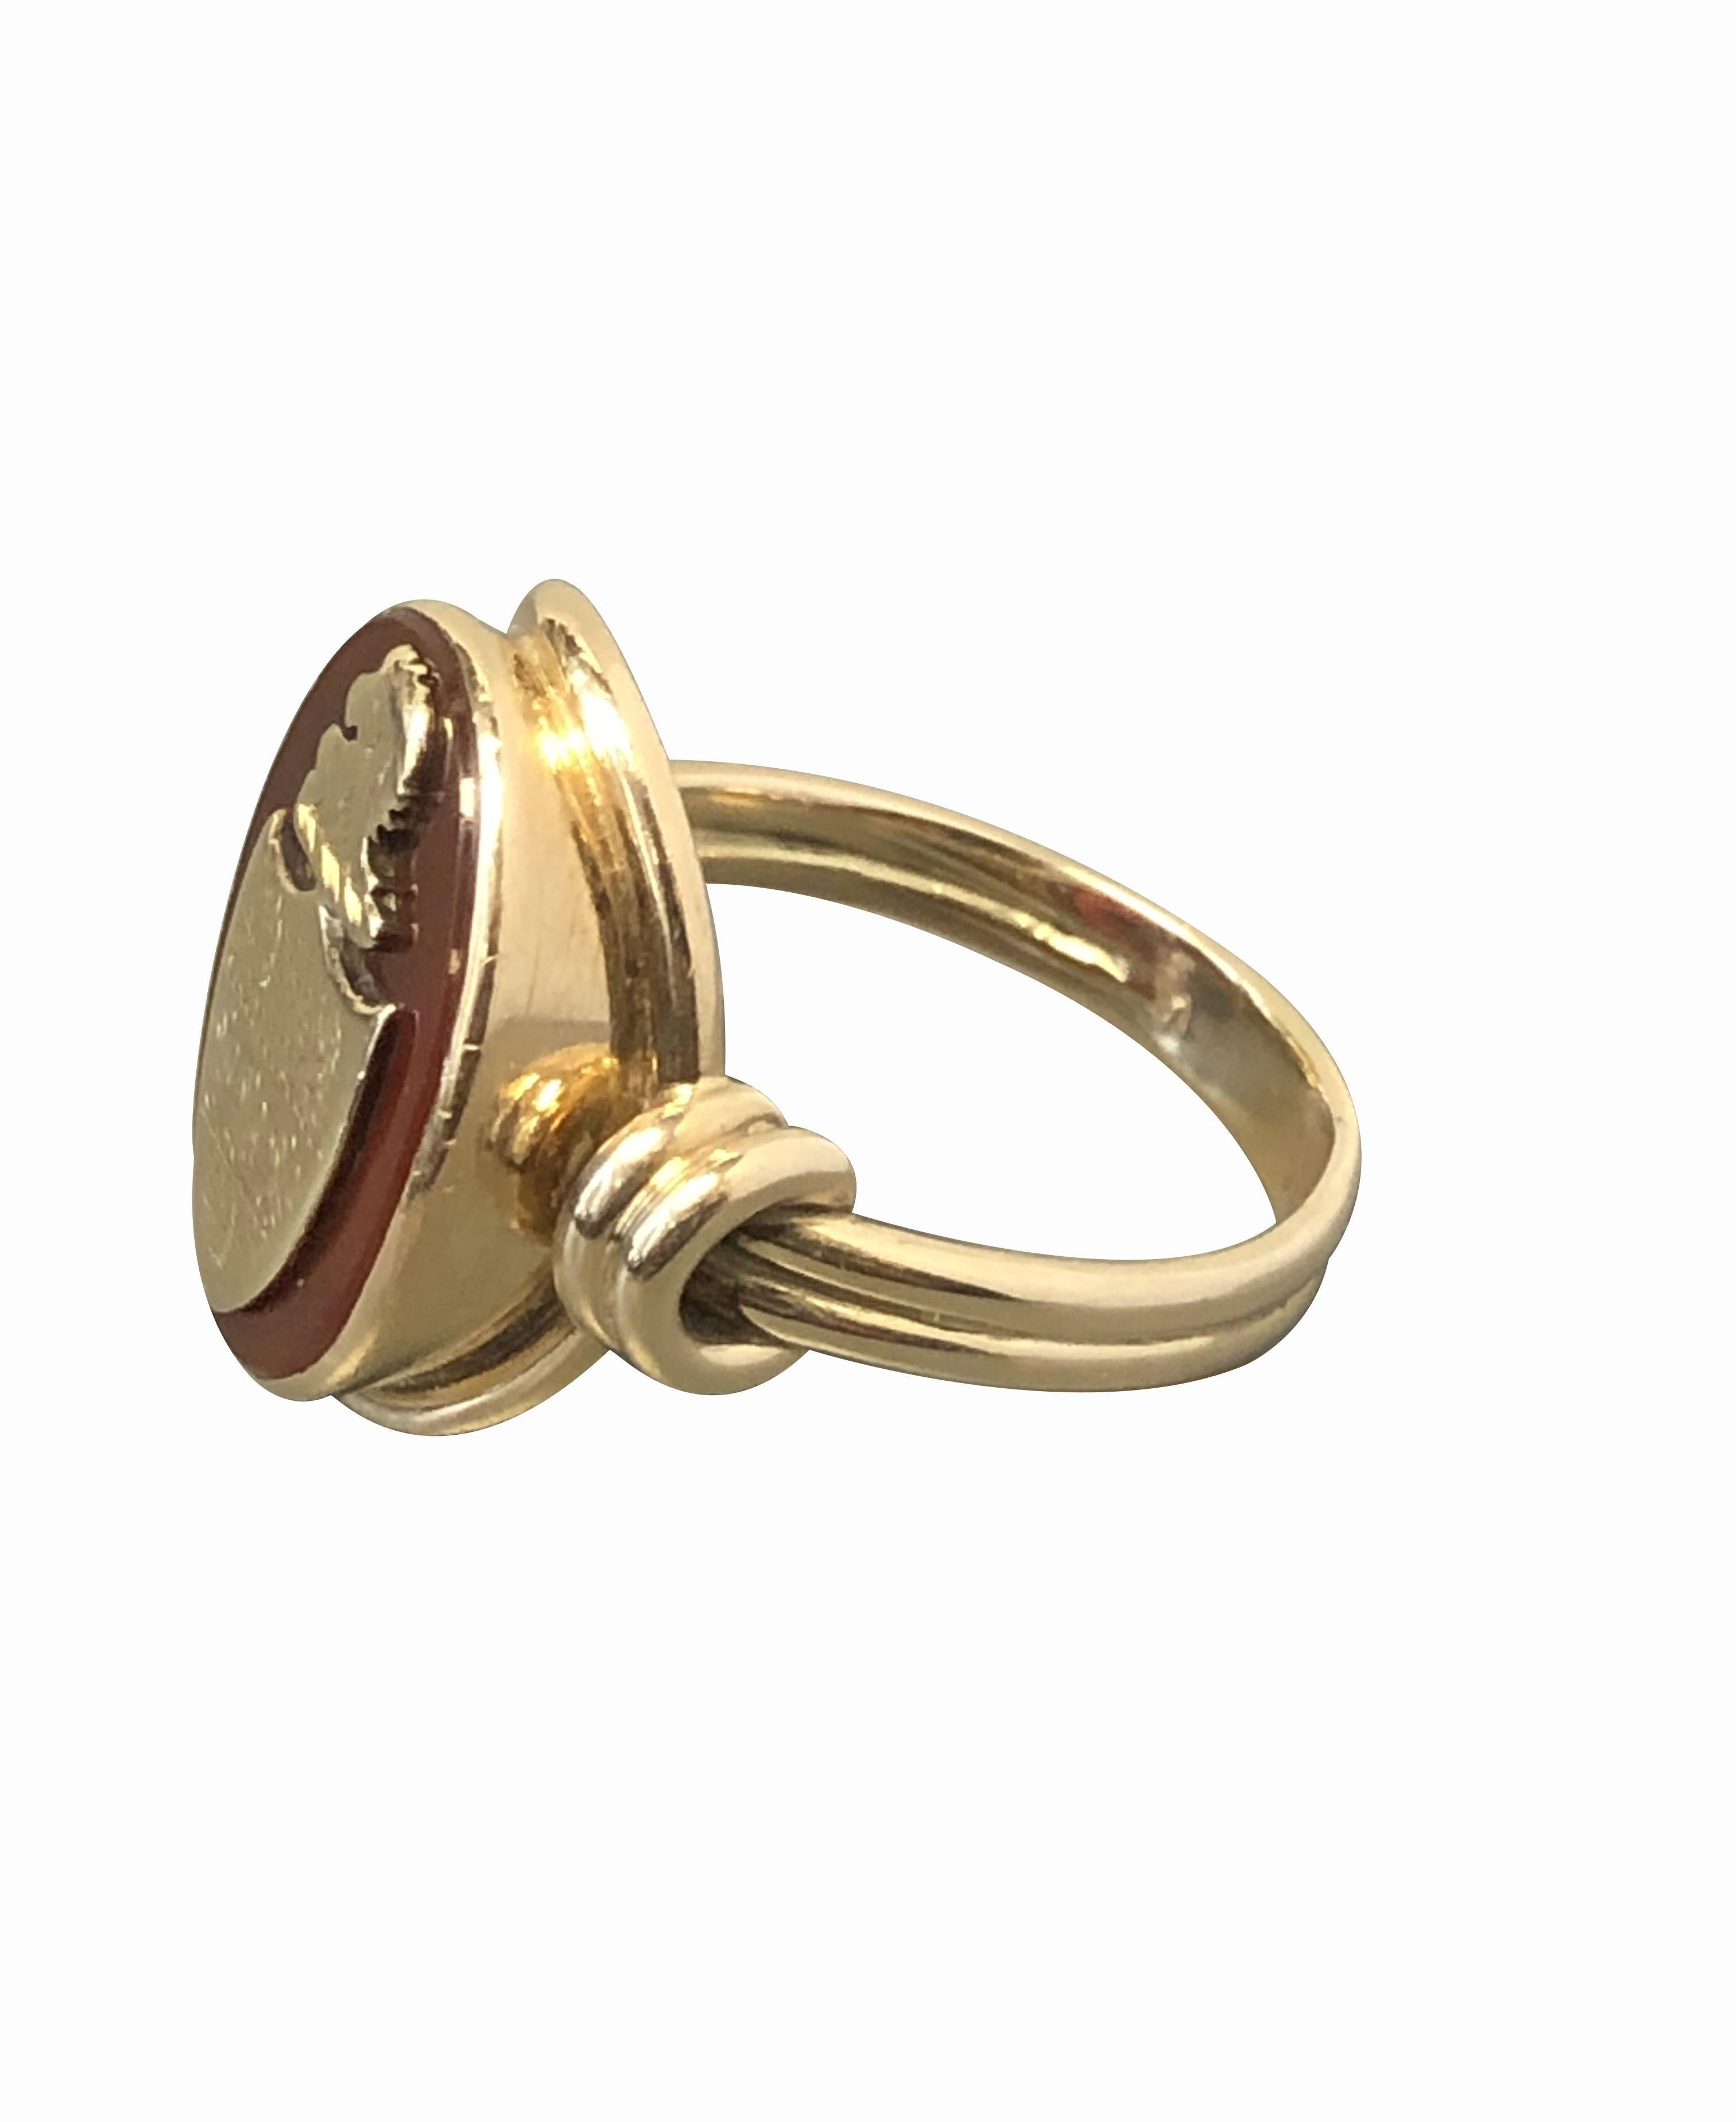 Antique Gold and Carnelian Signet Ring In Excellent Condition For Sale In Chicago, IL